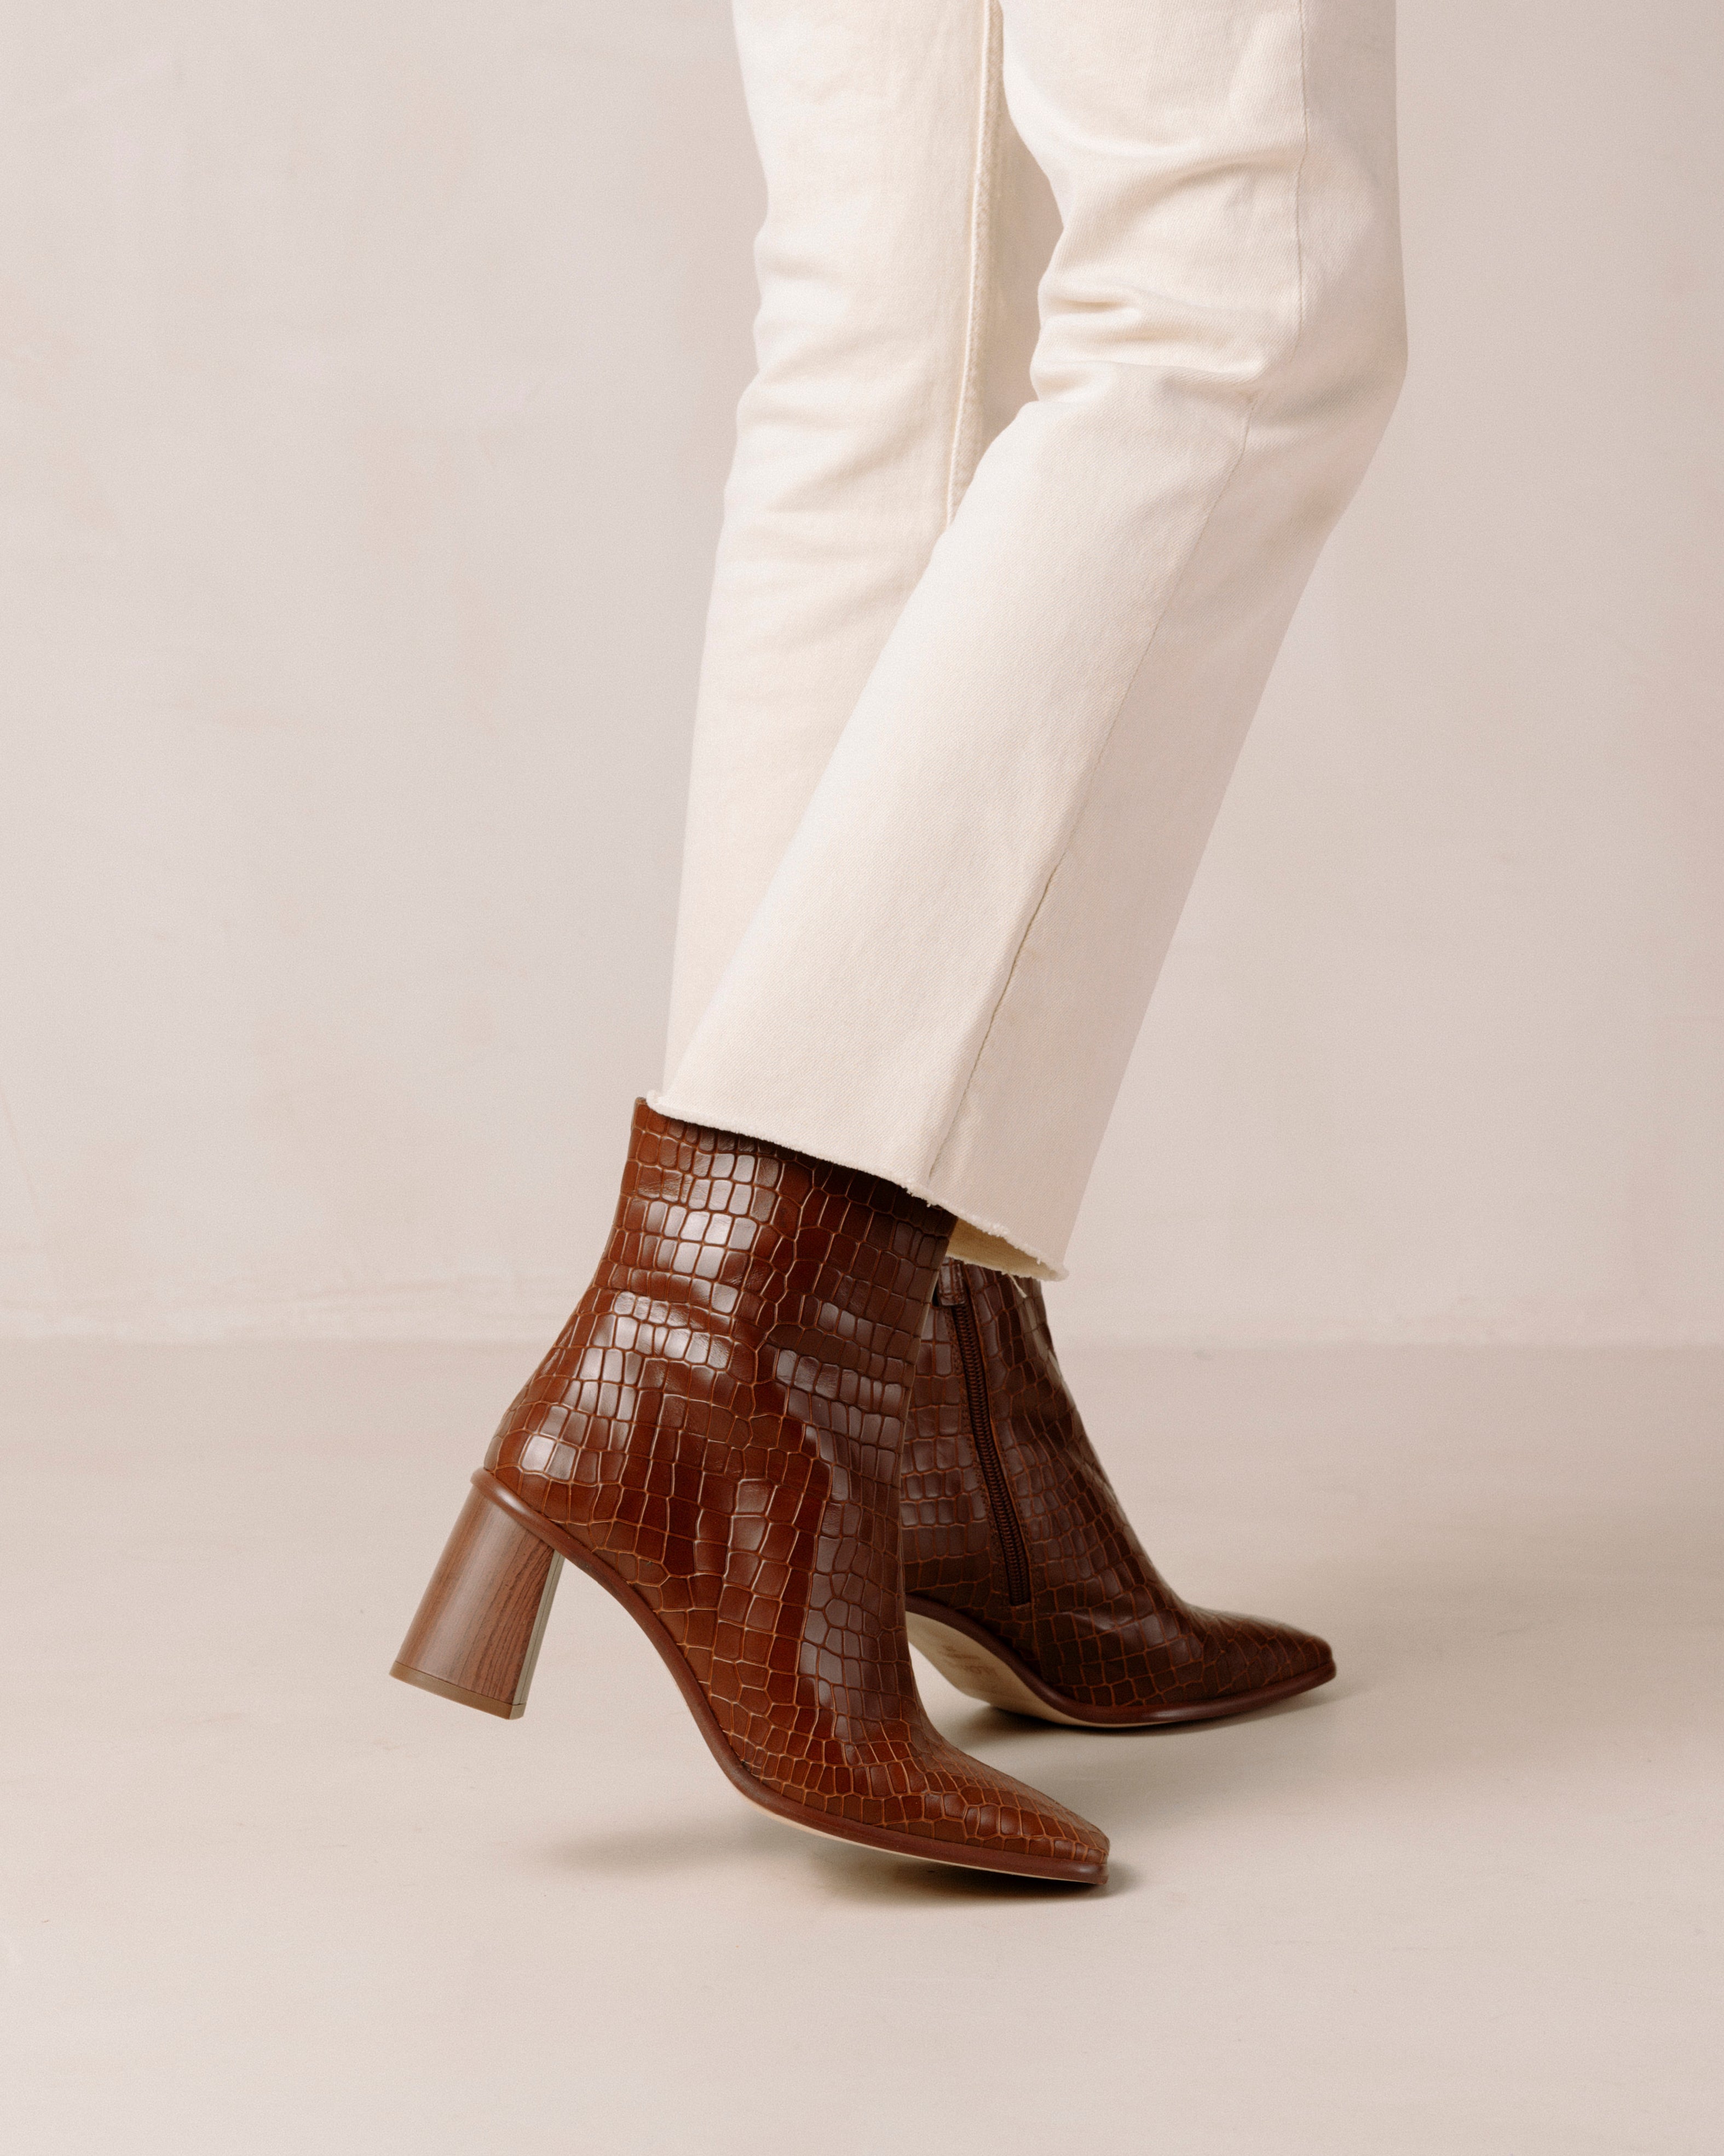 Hollow Calamity hvile West Cape Croco - Brown Leather Boots | ALOHAS